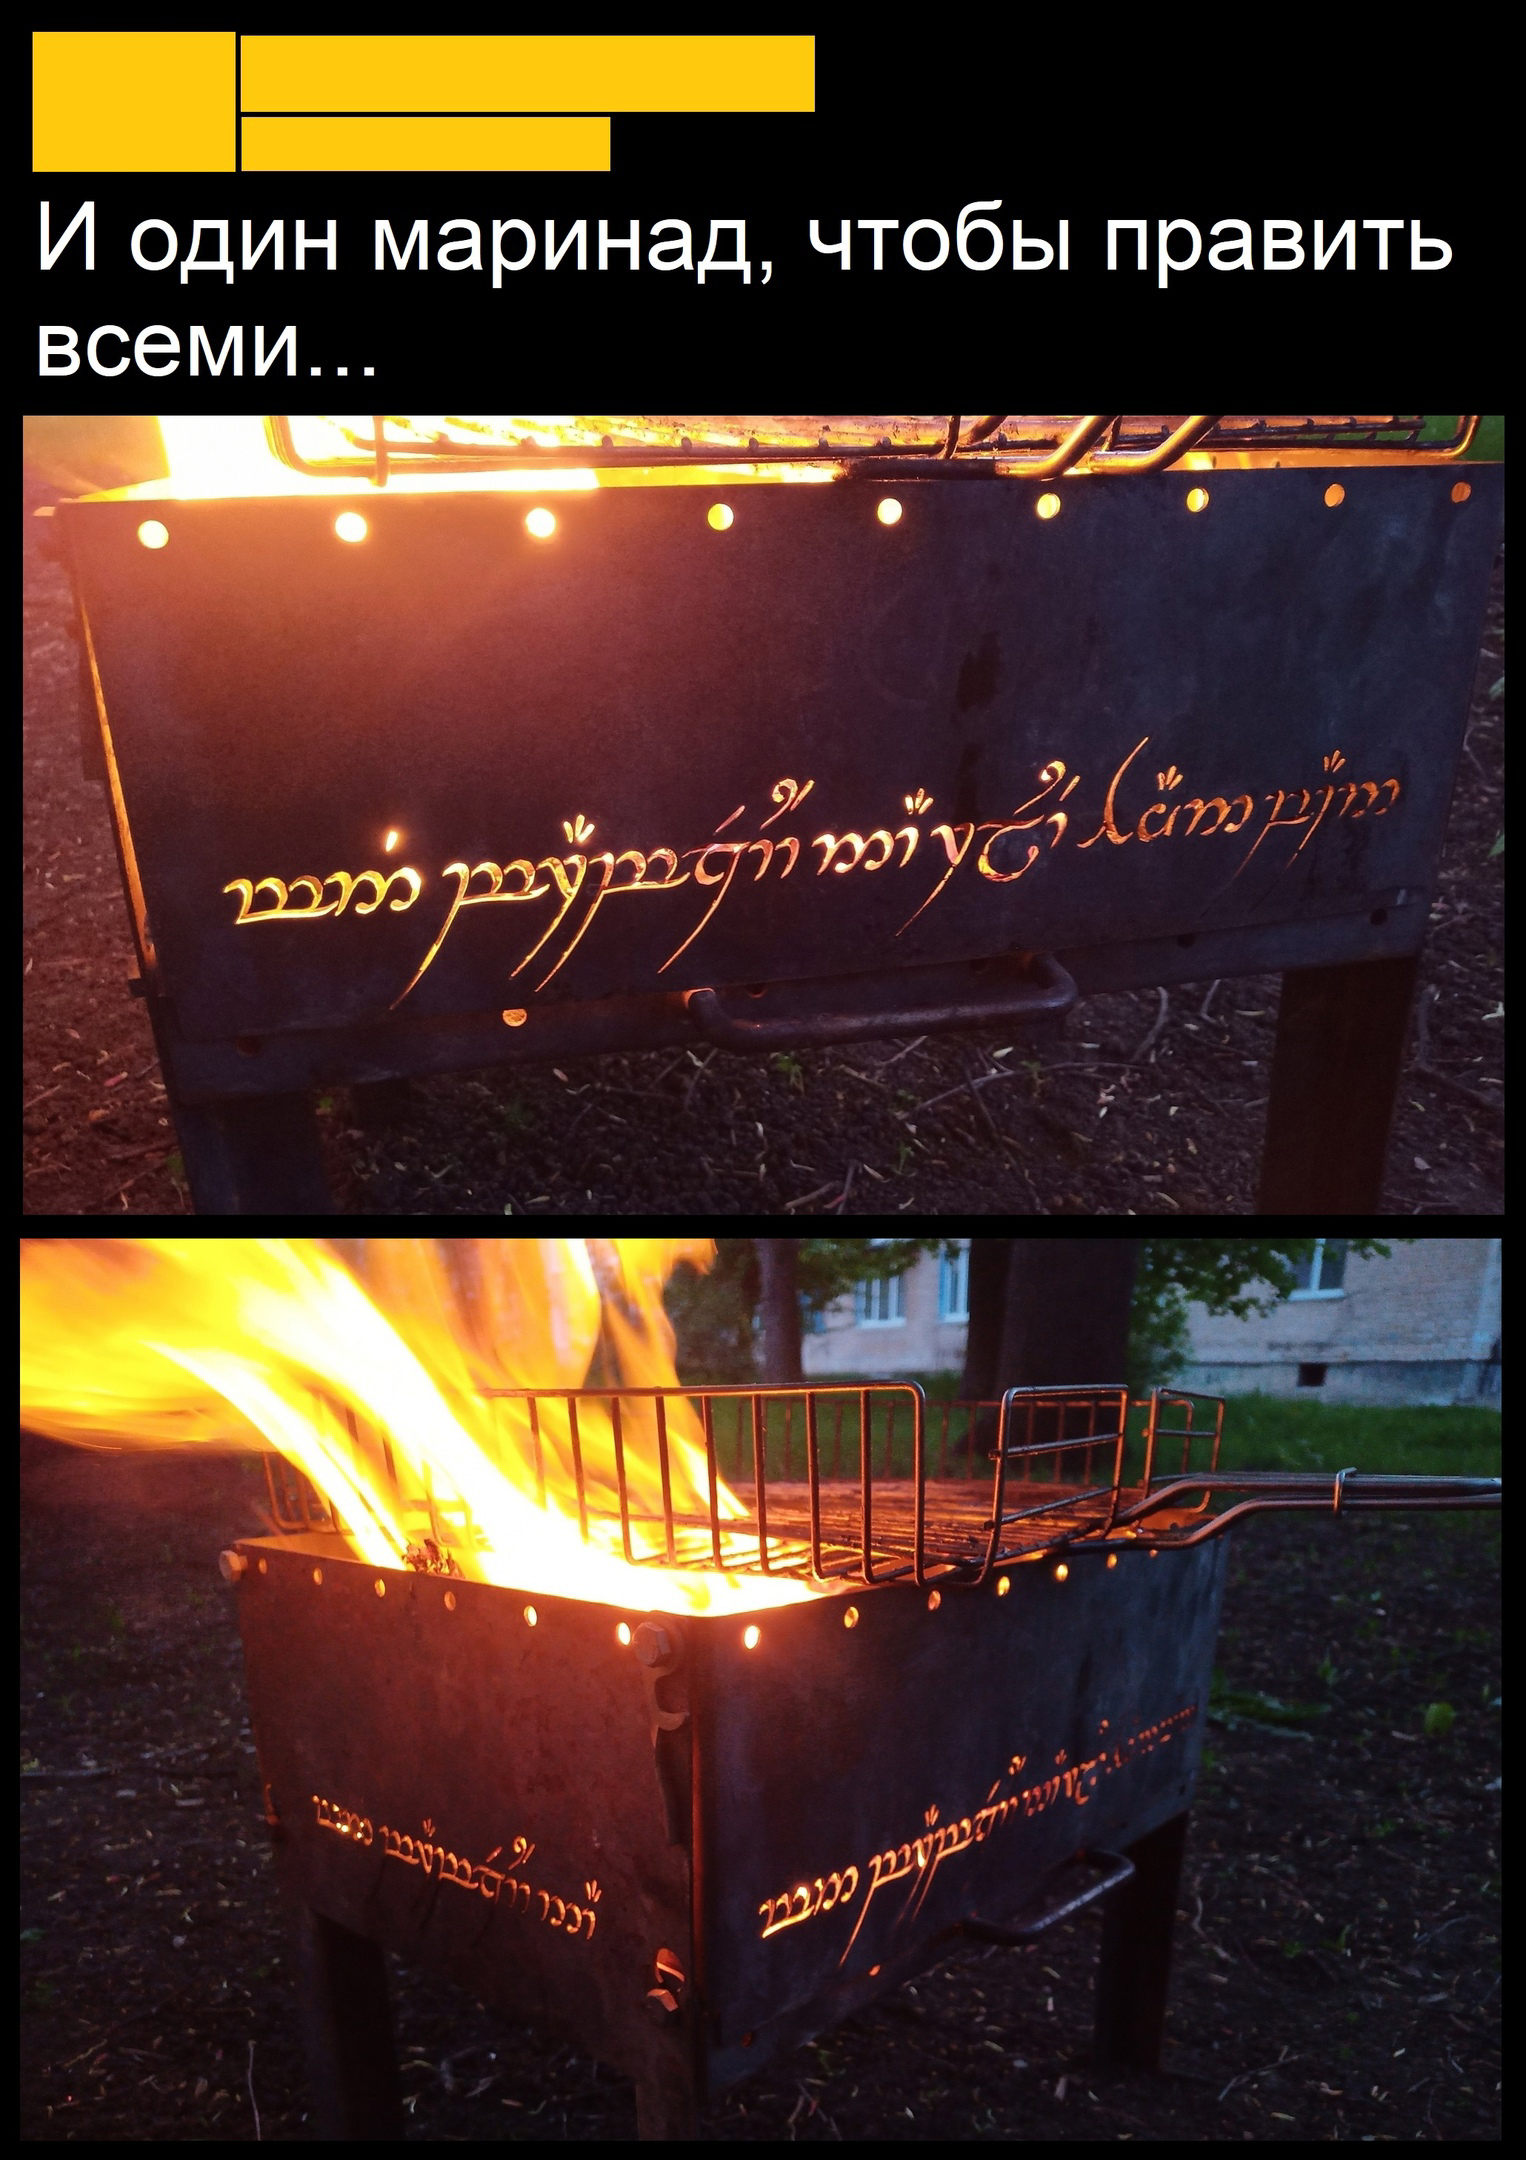 Brazier power - Brazier, Shashlik, Lord of the Rings, Metal products, Picture with text